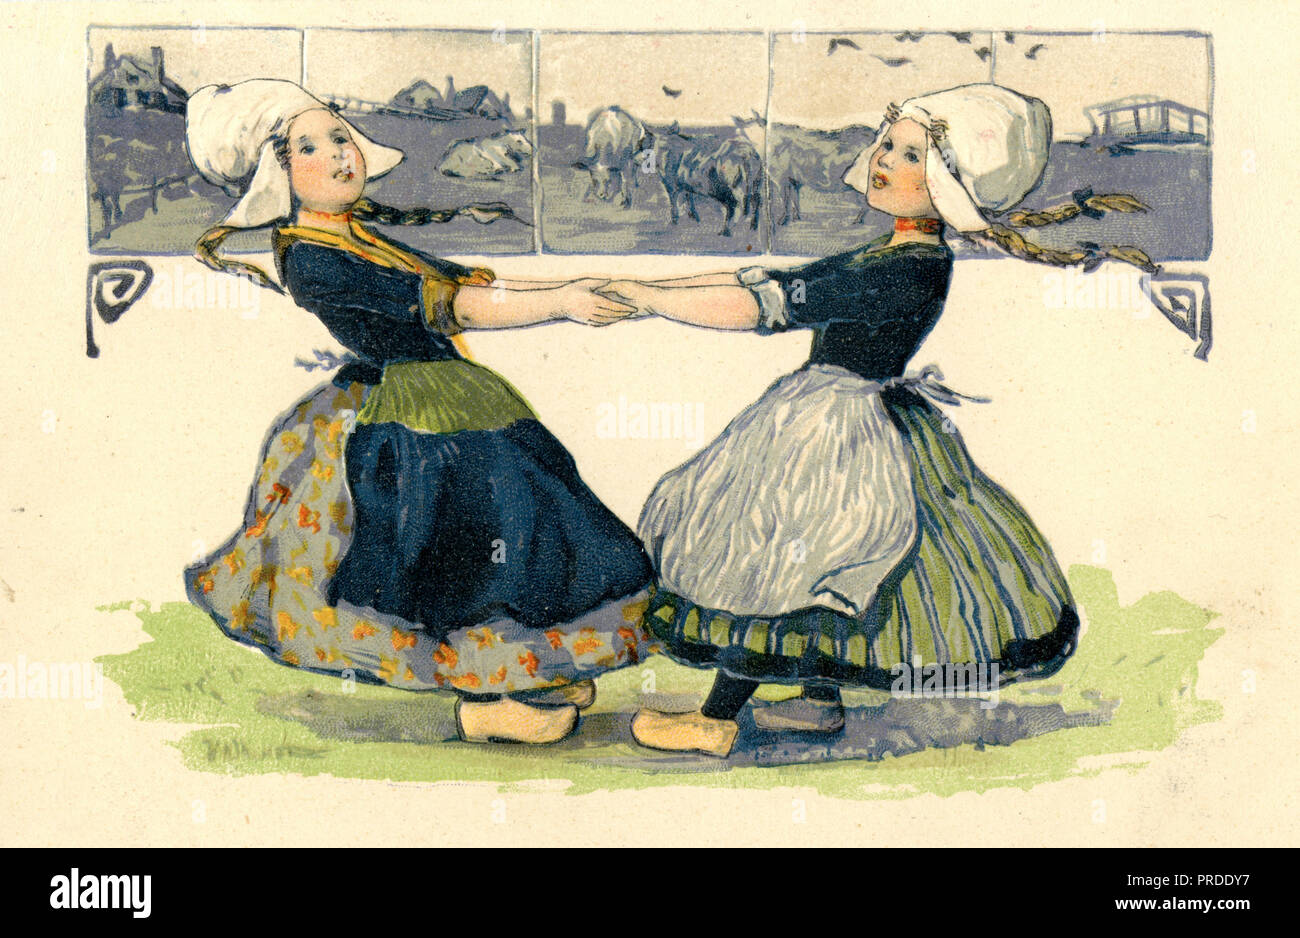 Girls in Dutch dress and clogs dance, Stock Photo